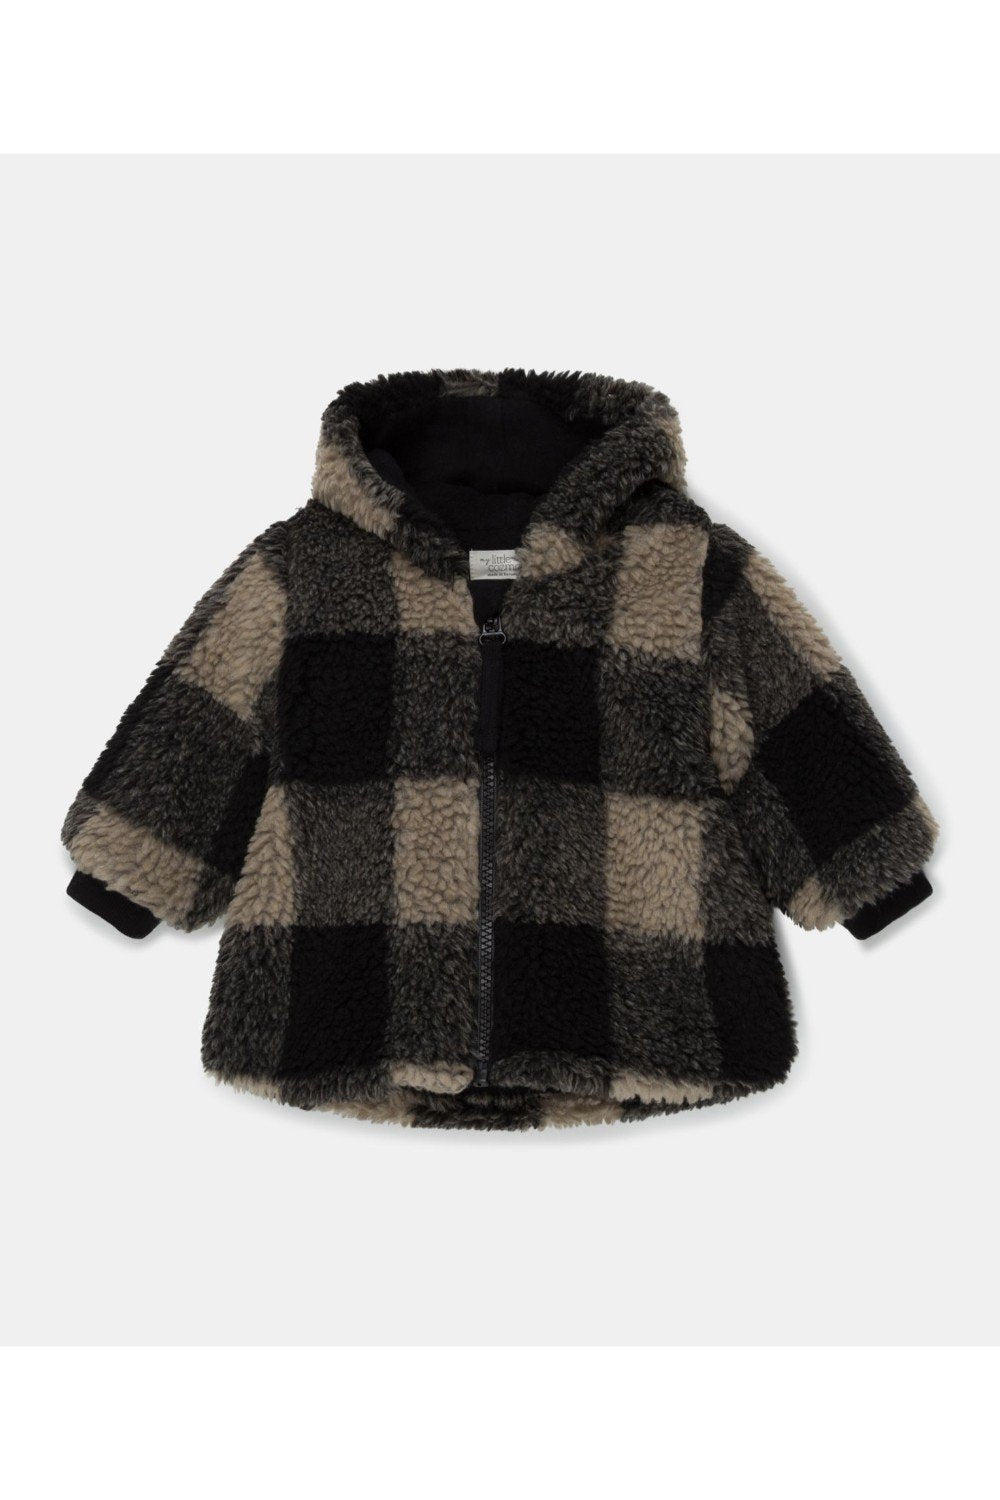 MY LITTLE COZMO PLAID SHERPA BABY COAT